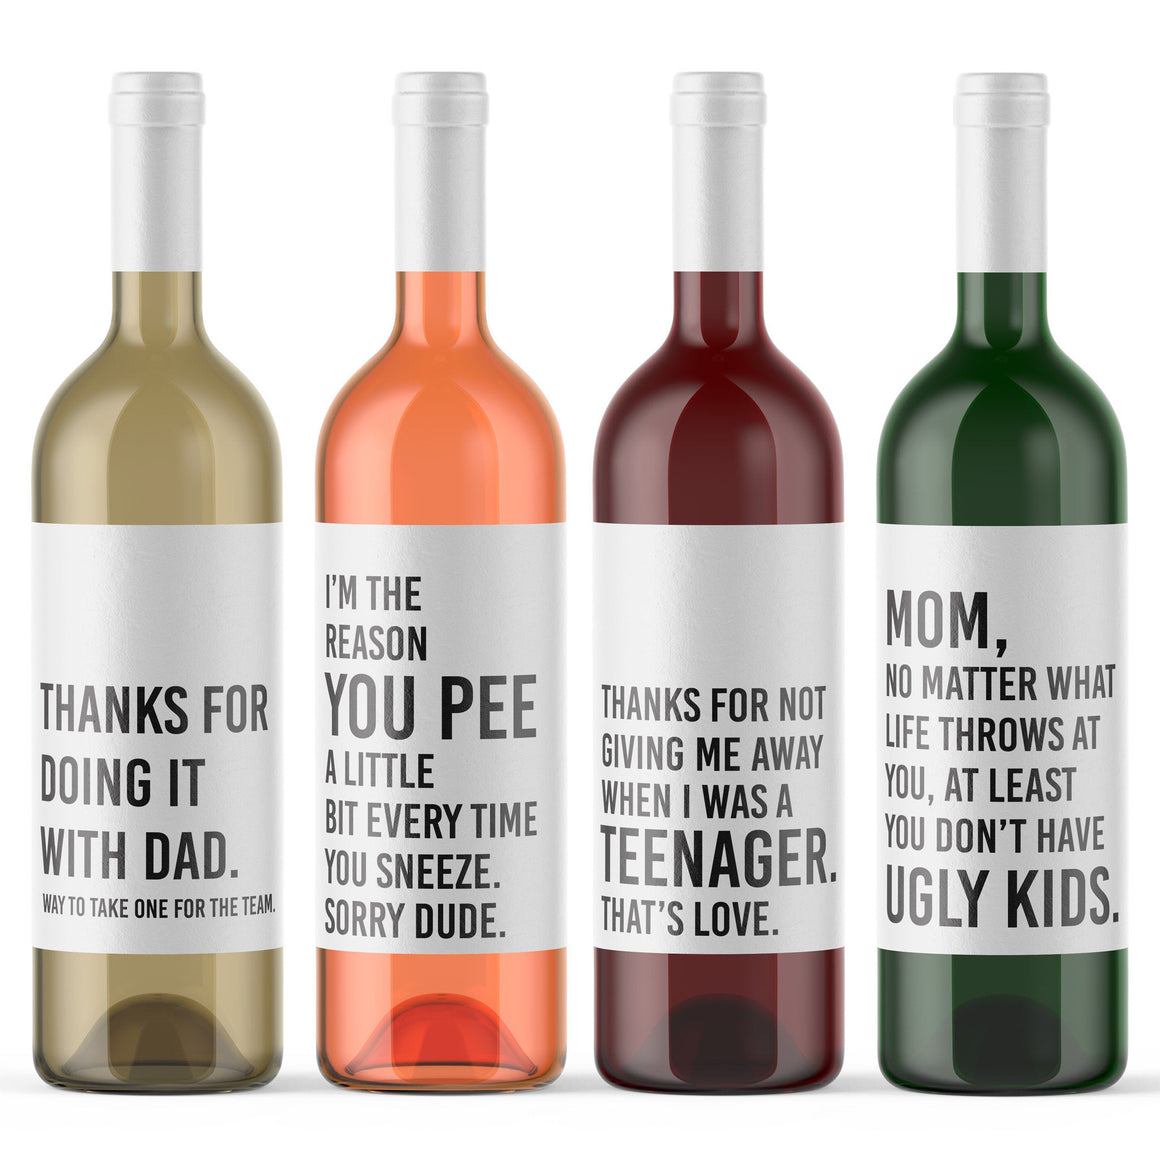 4 Funny Wine Bottle Labels for Mom Gift Thanks For Doing It With Dad | No Matter What Life Throws At You You Don't Have Ugly Kids 9165